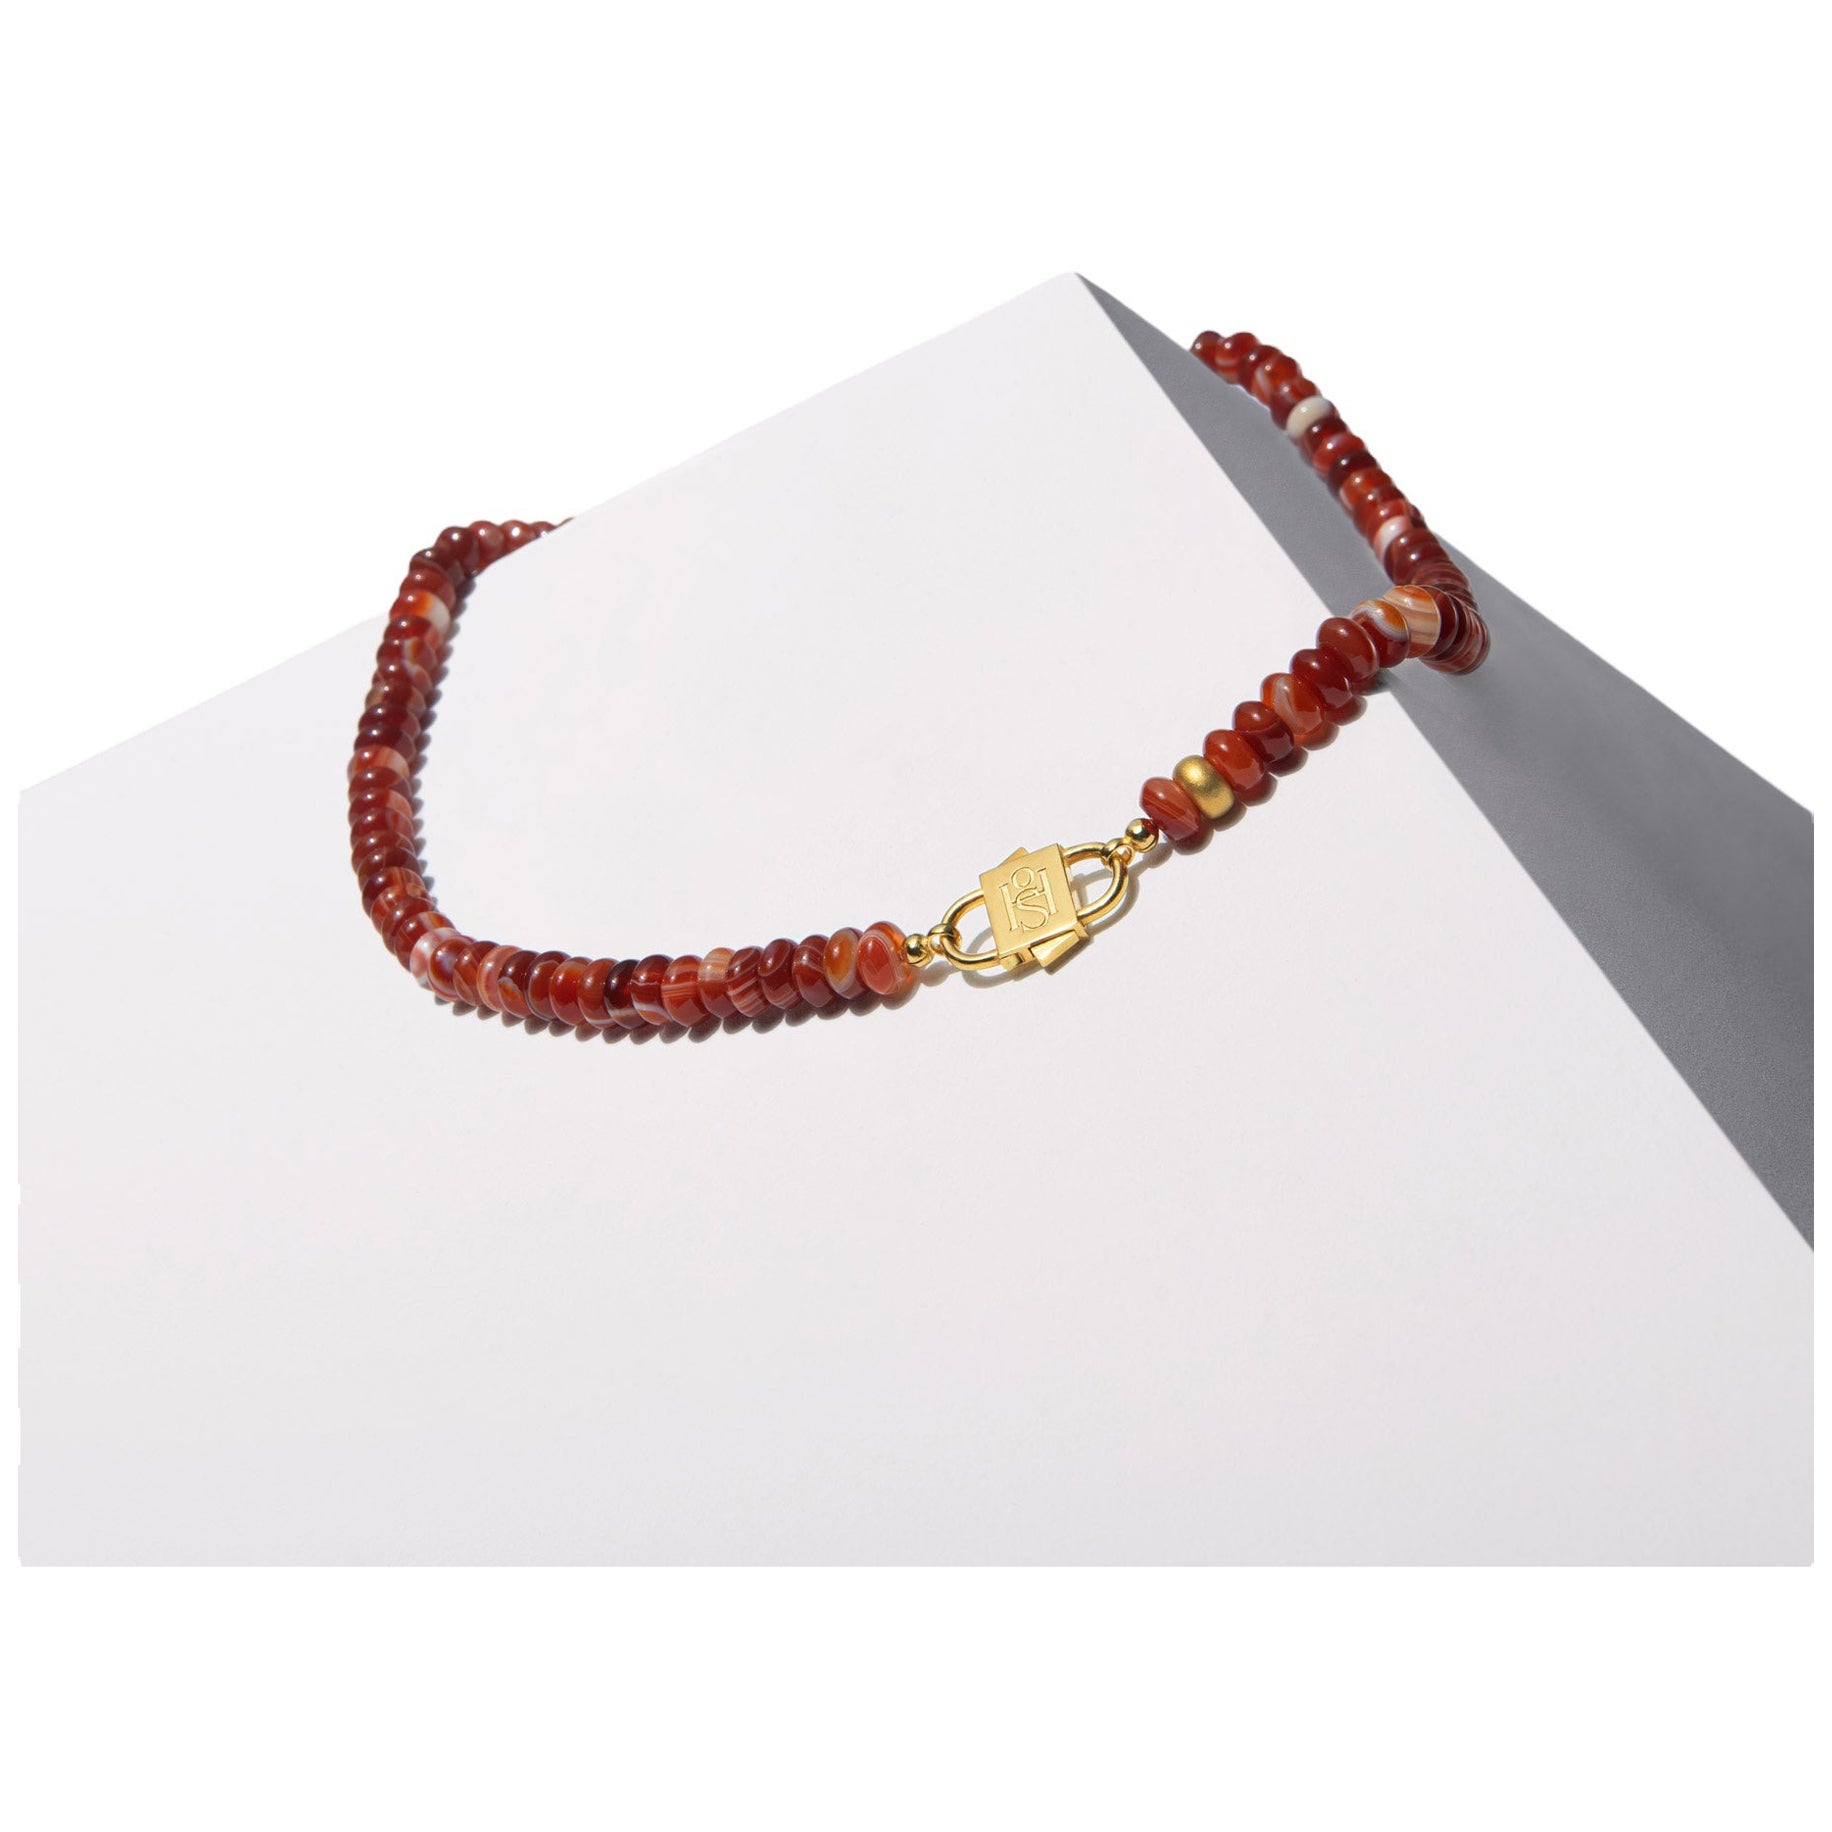  House of Sol Red Agate Necklace with Baby HoS Lock For Sale